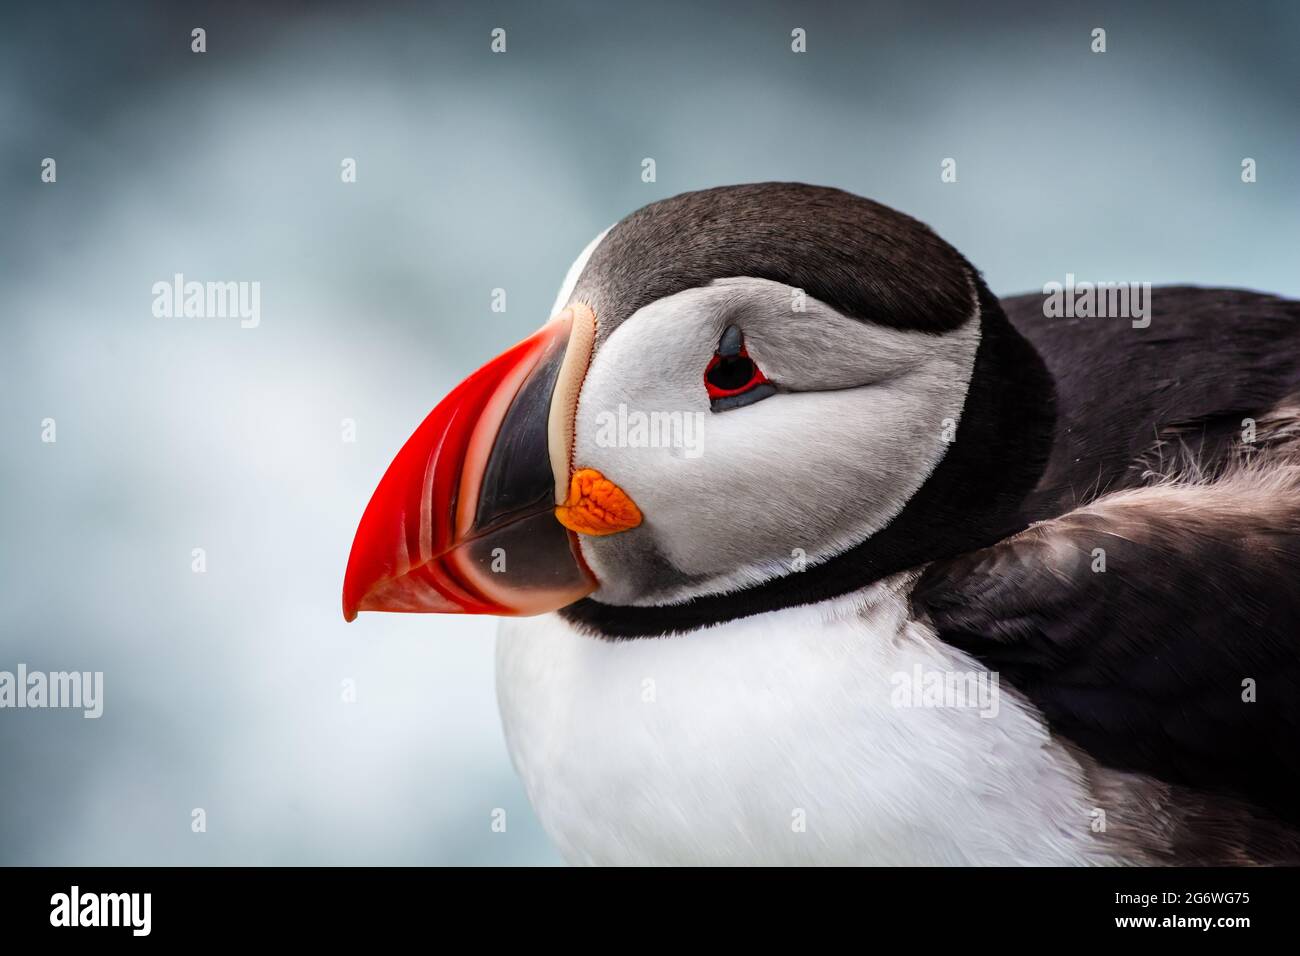 close up view on the head of a puffin Stock Photo